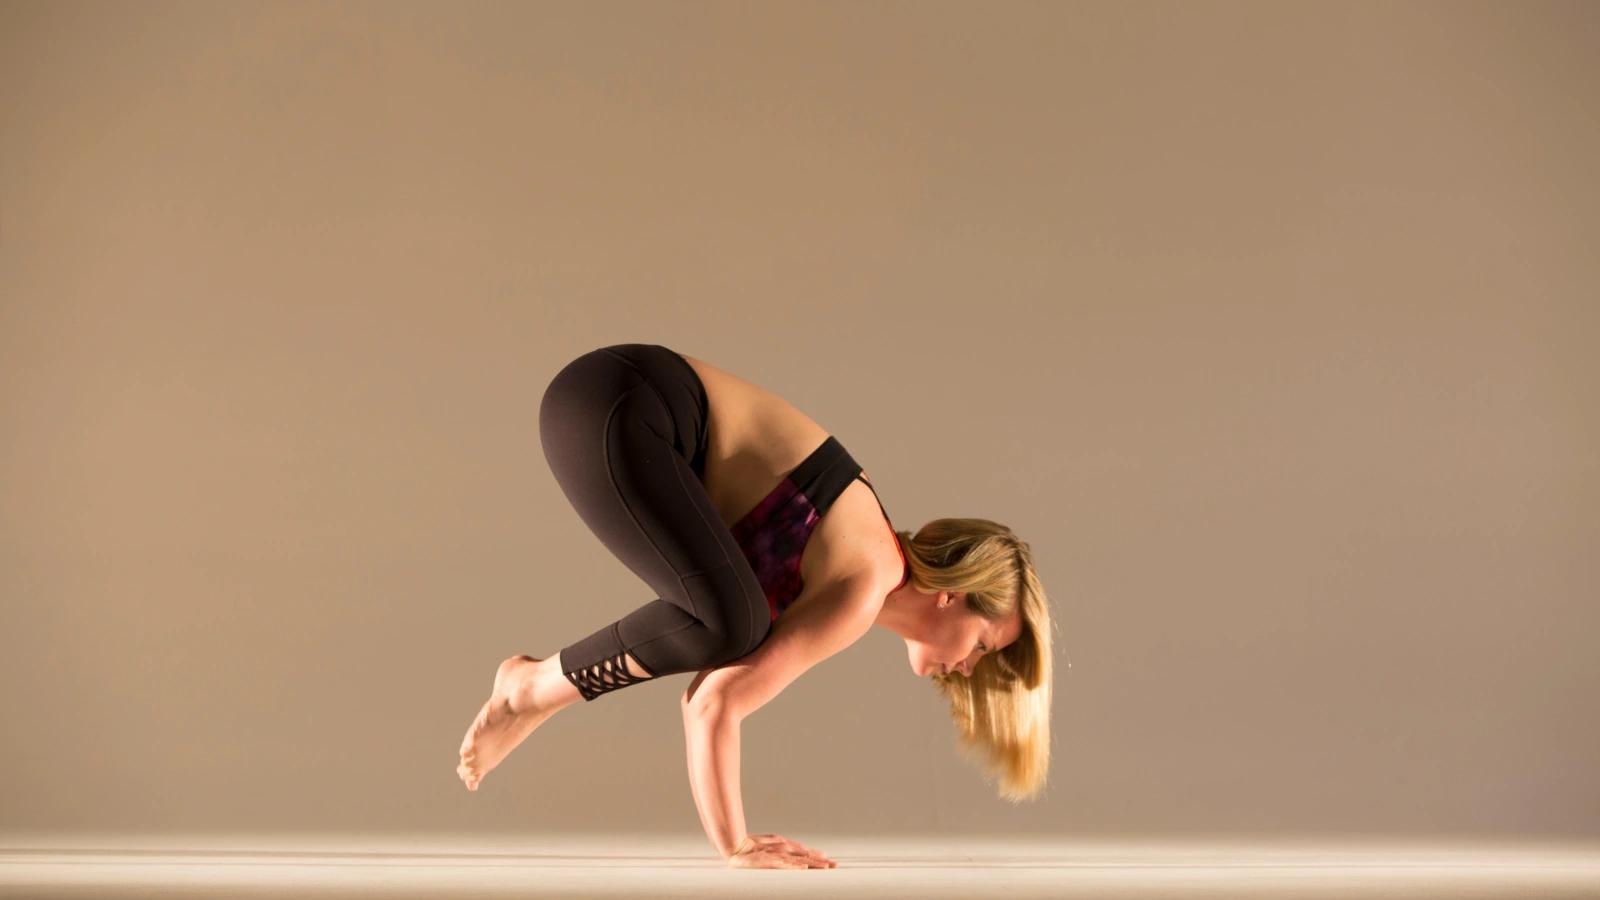 crow position yoga - What is the trick to doing crow pose